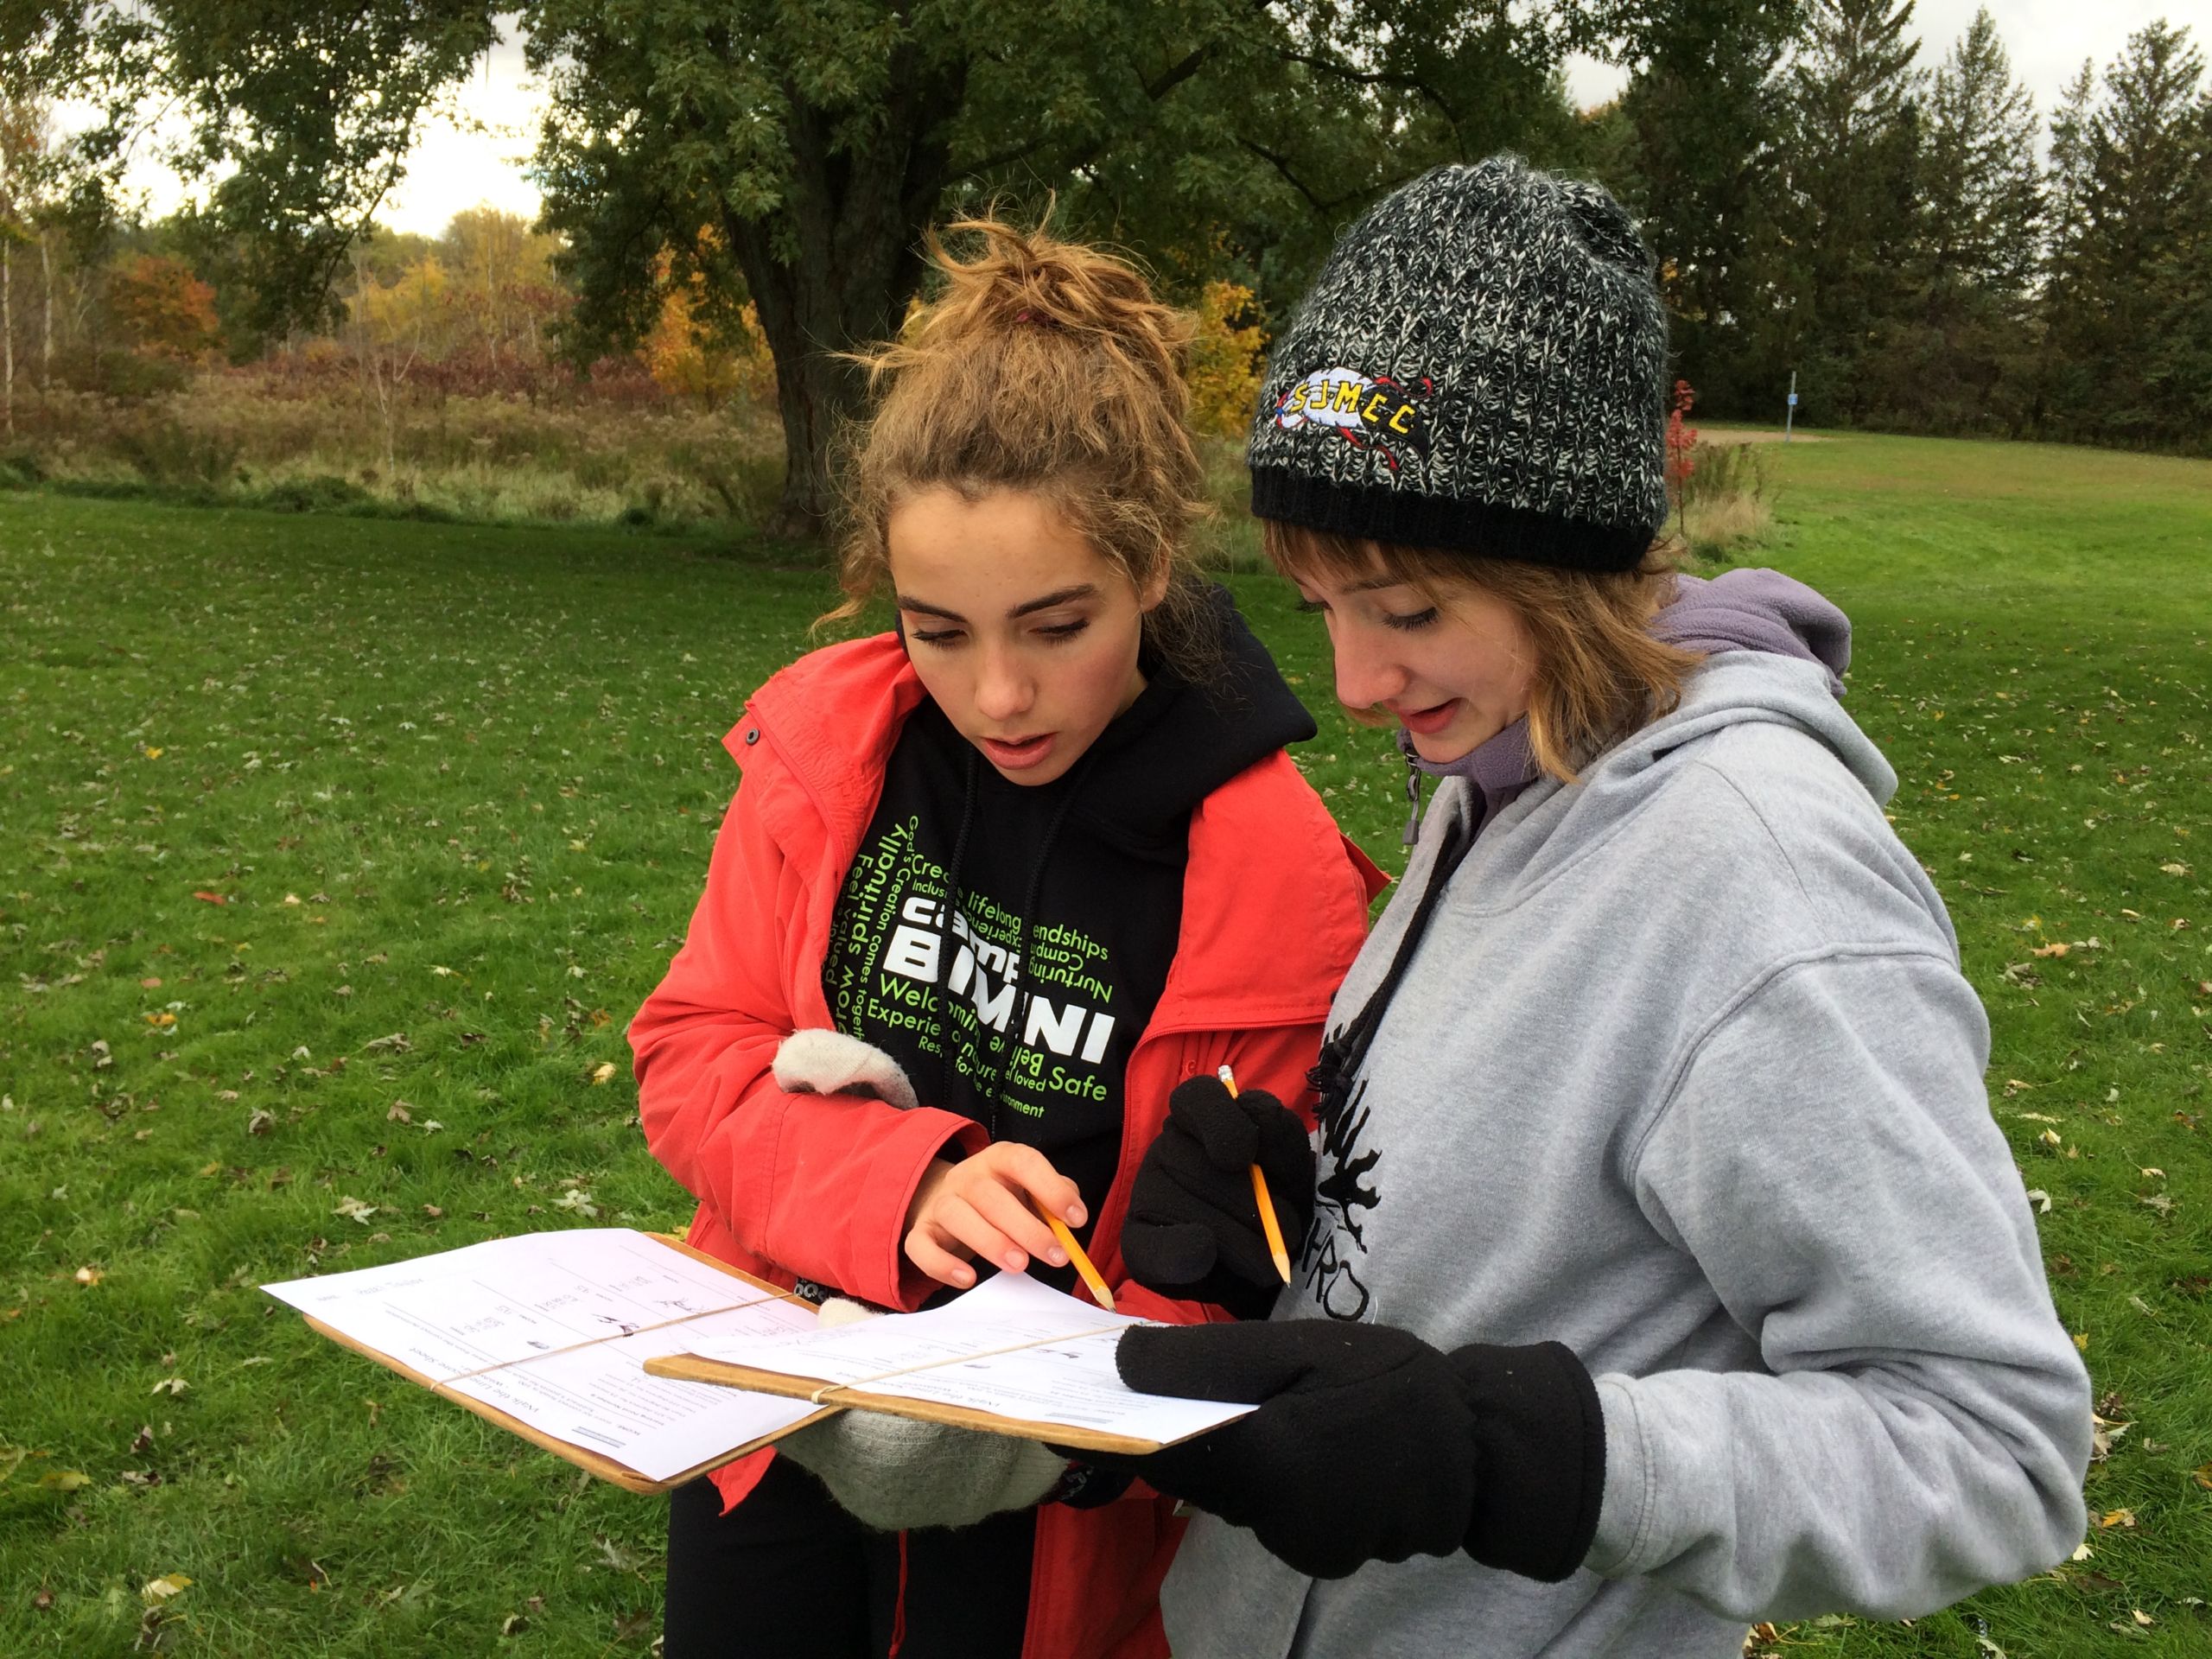 Two students standing in a grassy field, looking at worksheets on clipboards they are holding